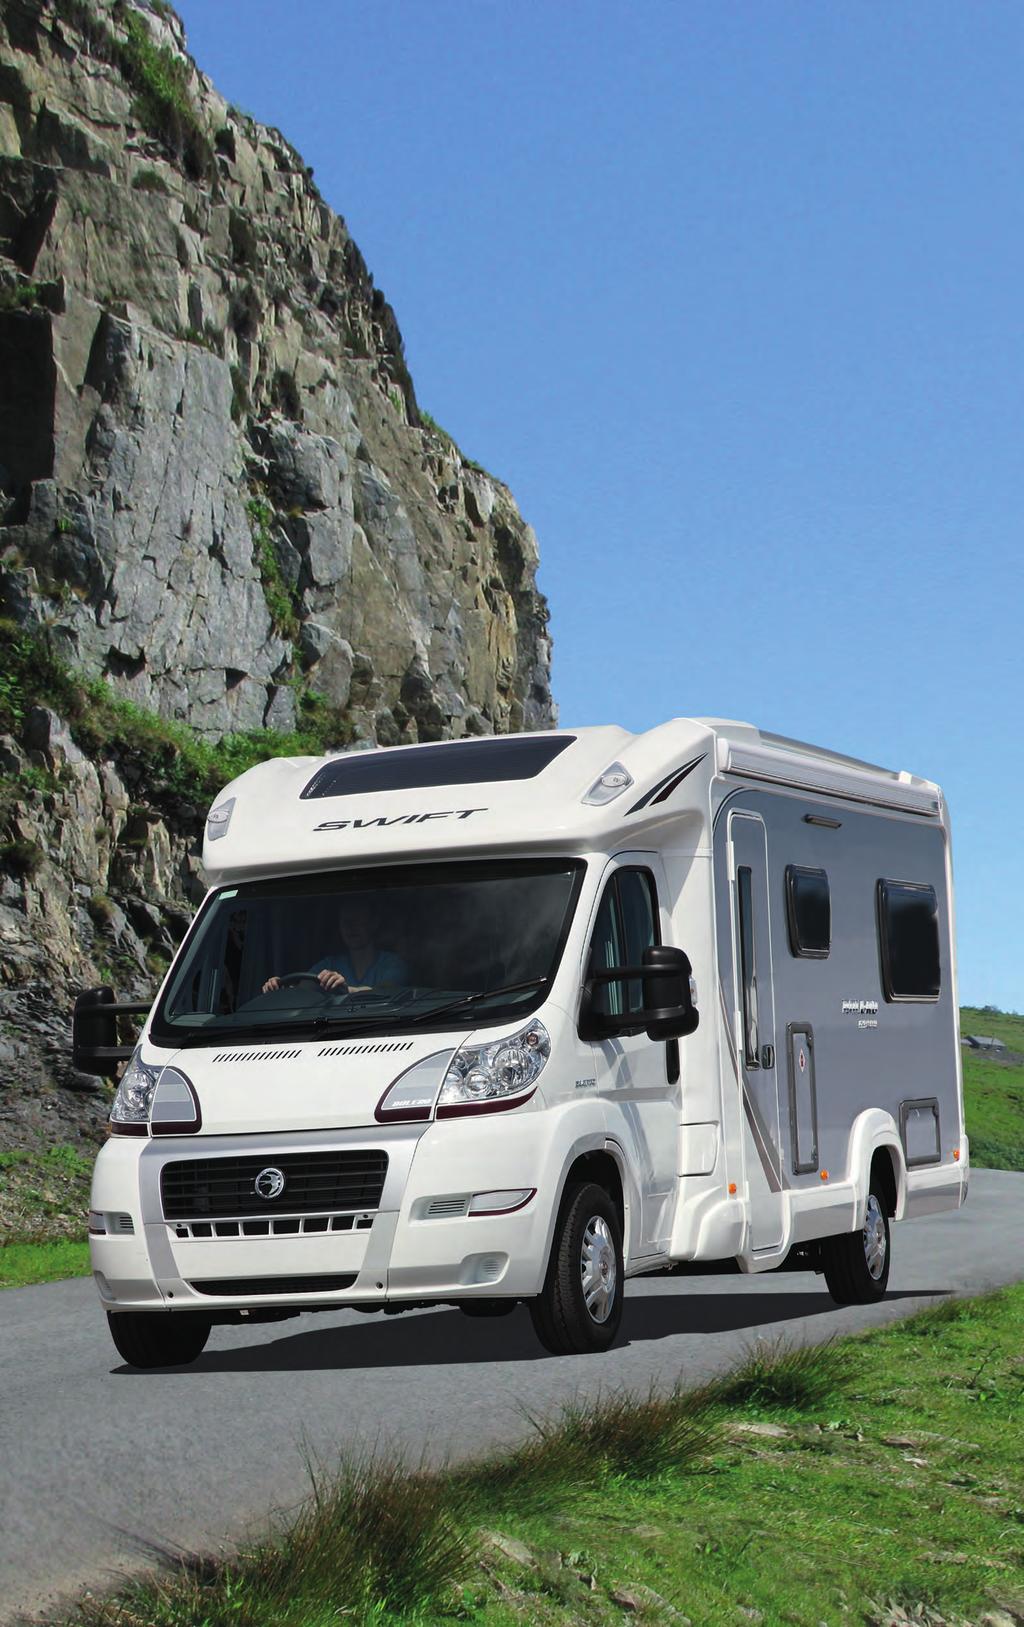 Motorhomes Swift Group Limited provides a three-year warranty on the coachbuilt element of the motorhome, see www.swiftmotorhomes.co.uk for more details.